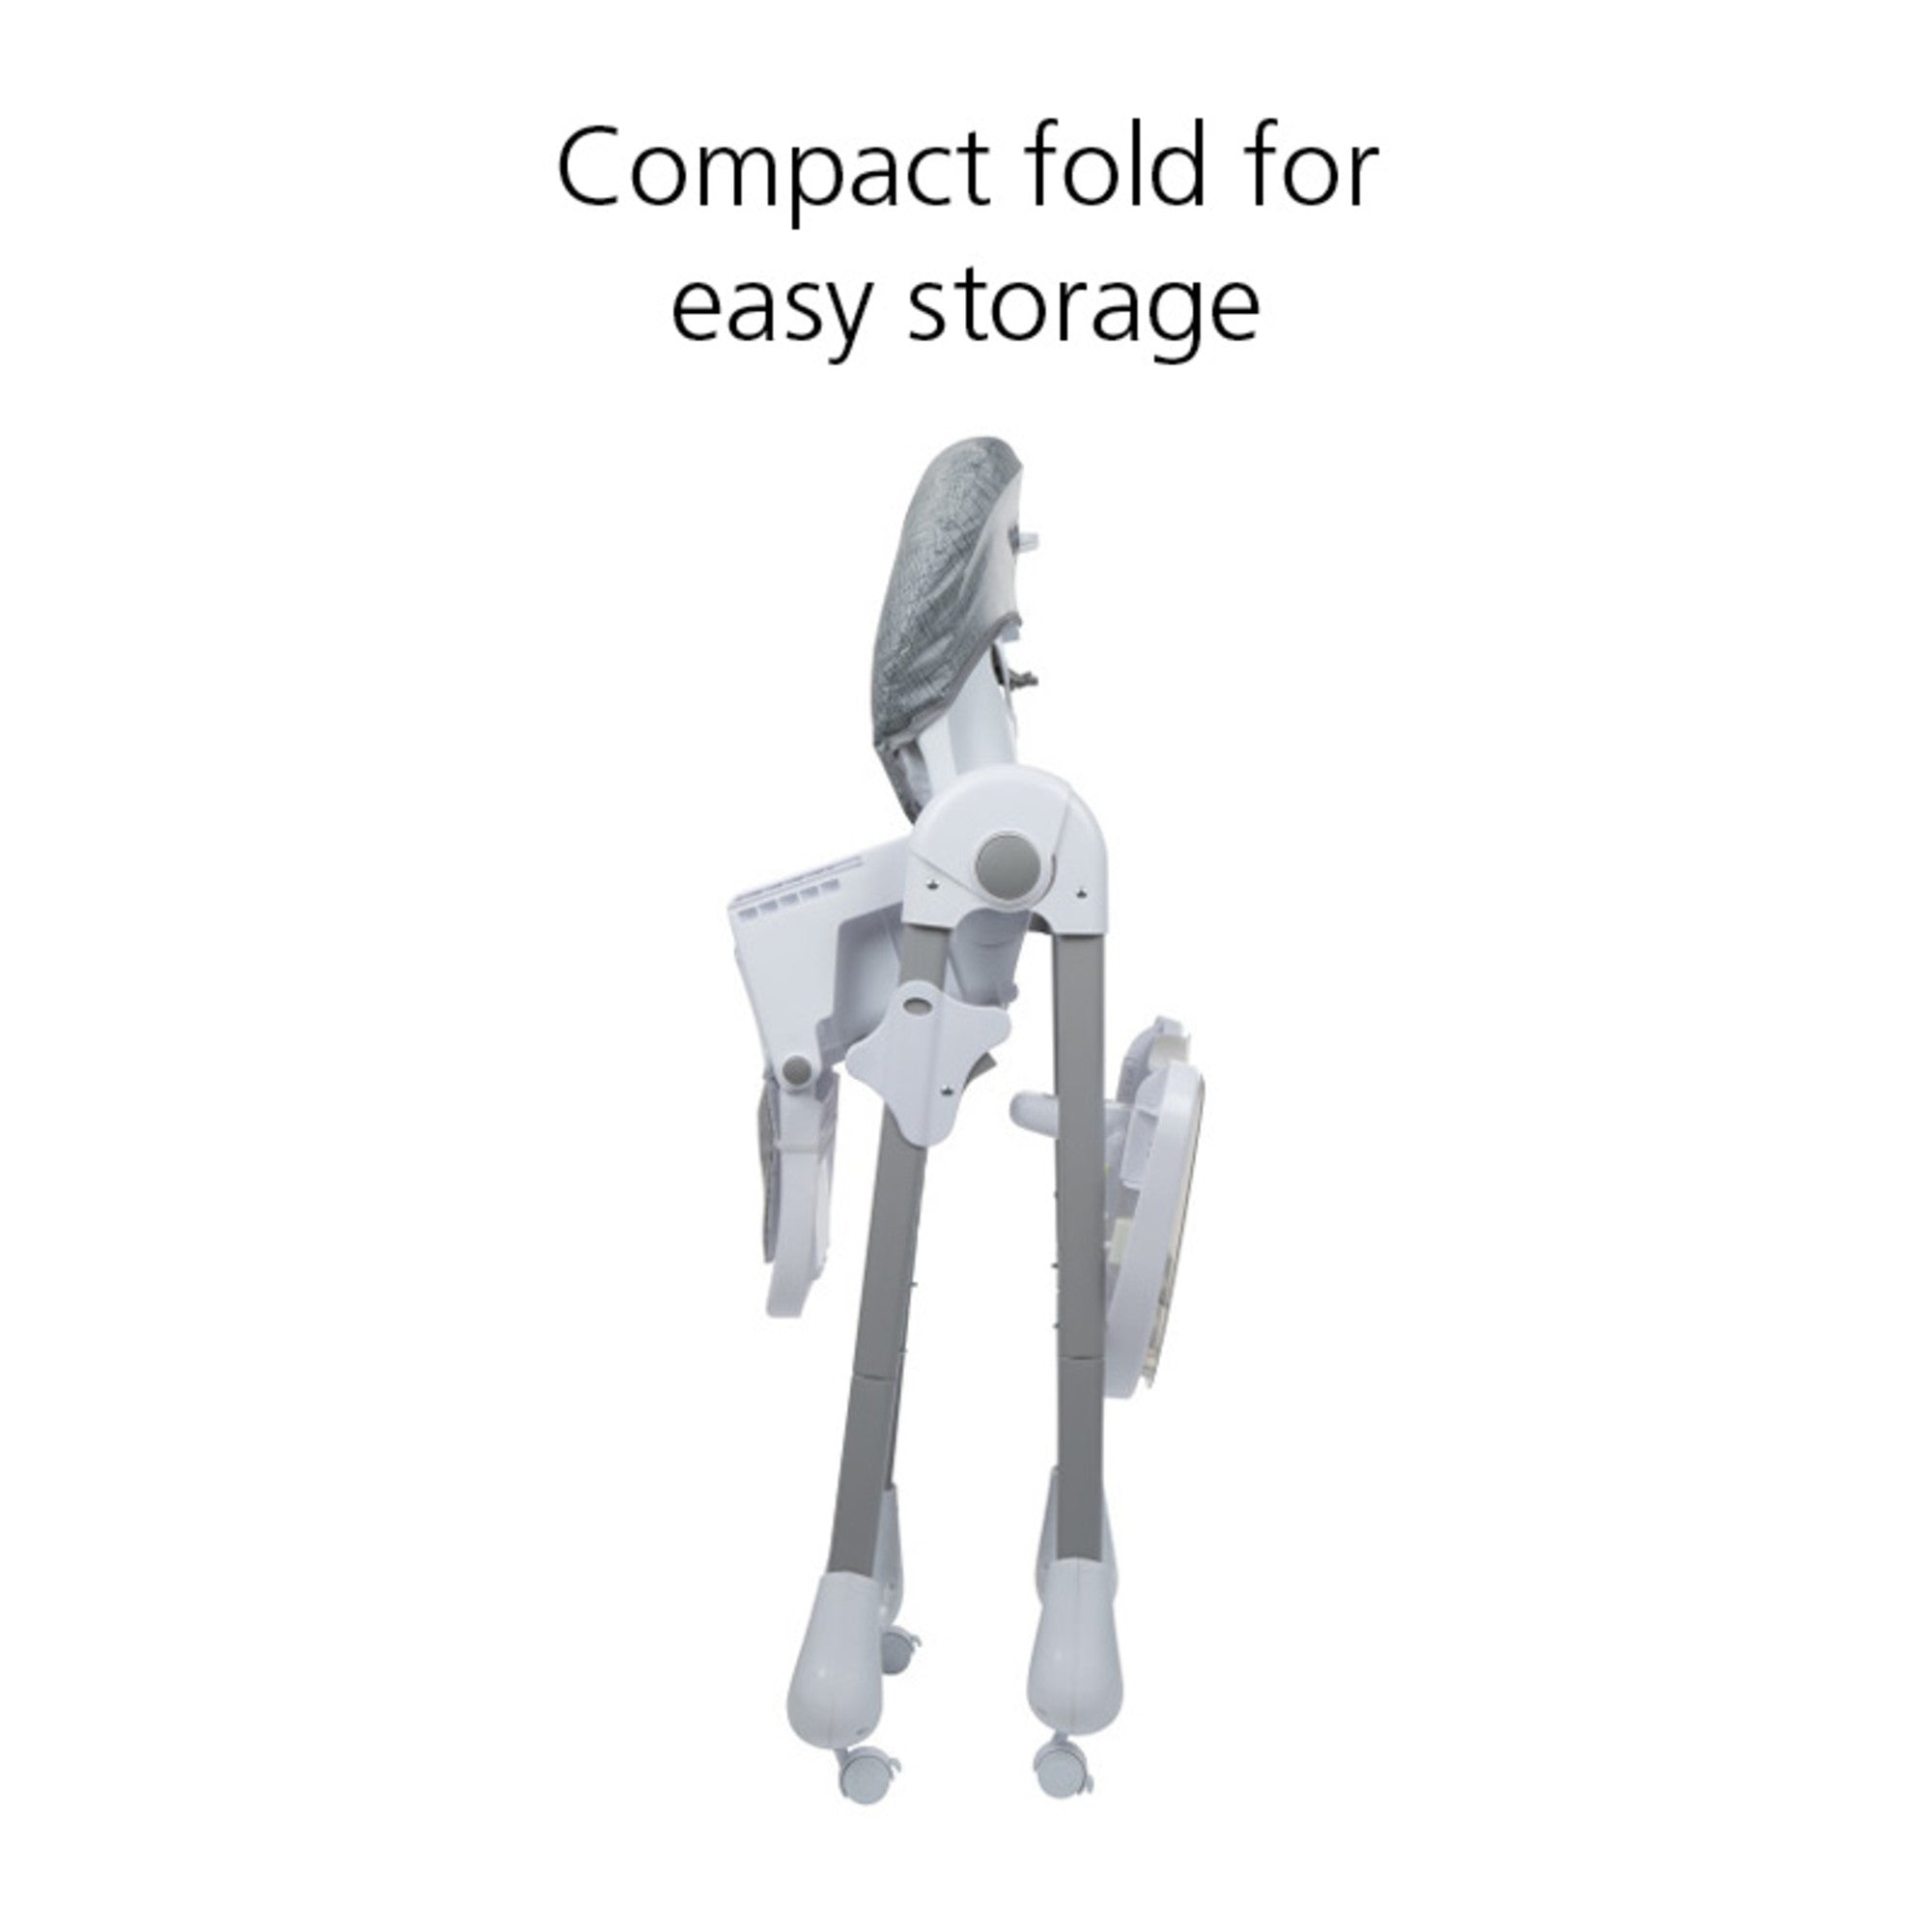 Compact fold for easy storage.